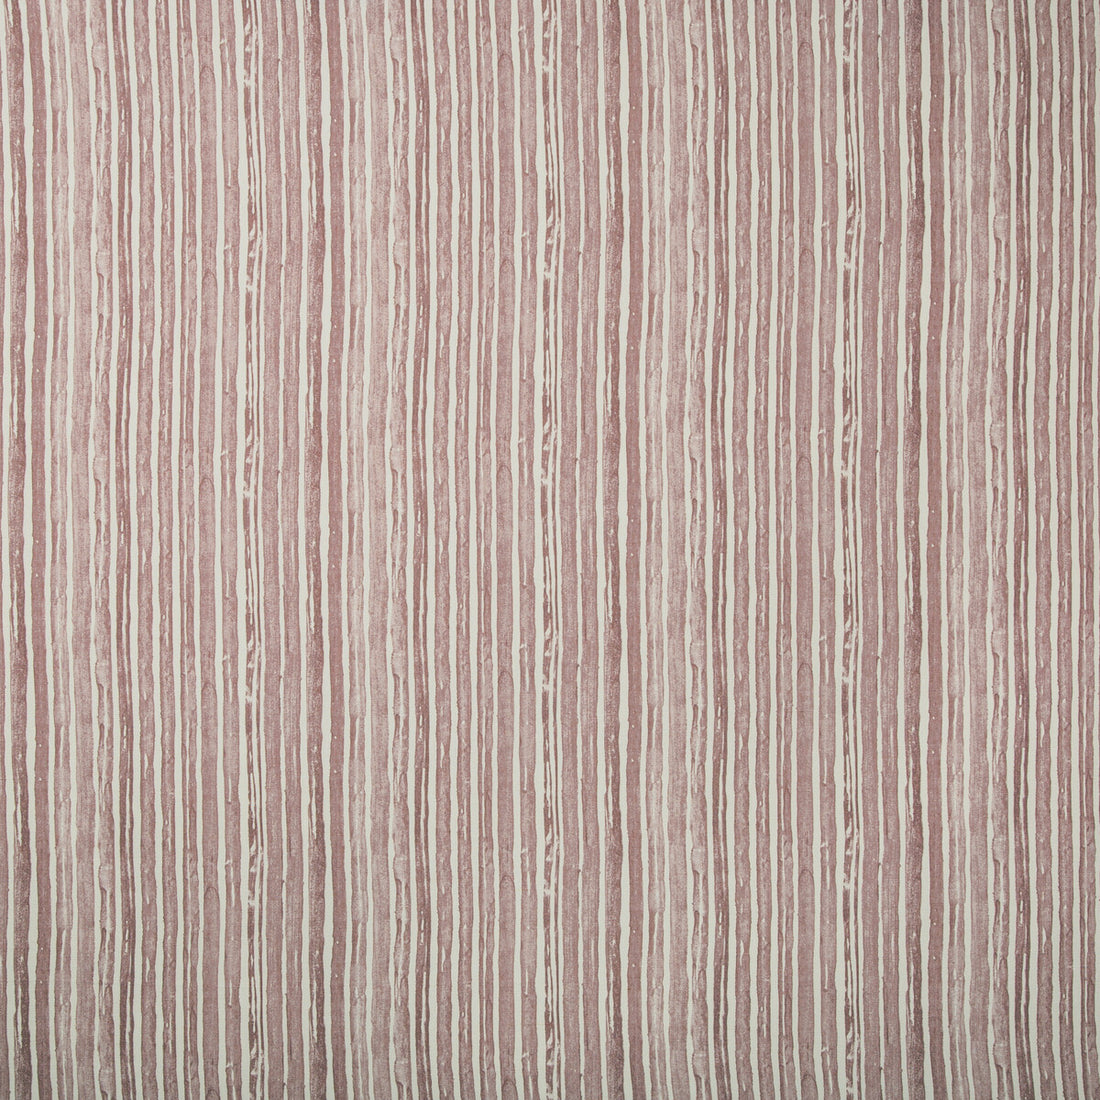 Benson Stripe fabric in lavender color - pattern 2019151.710.0 - by Lee Jofa in the Carrier And Company collection